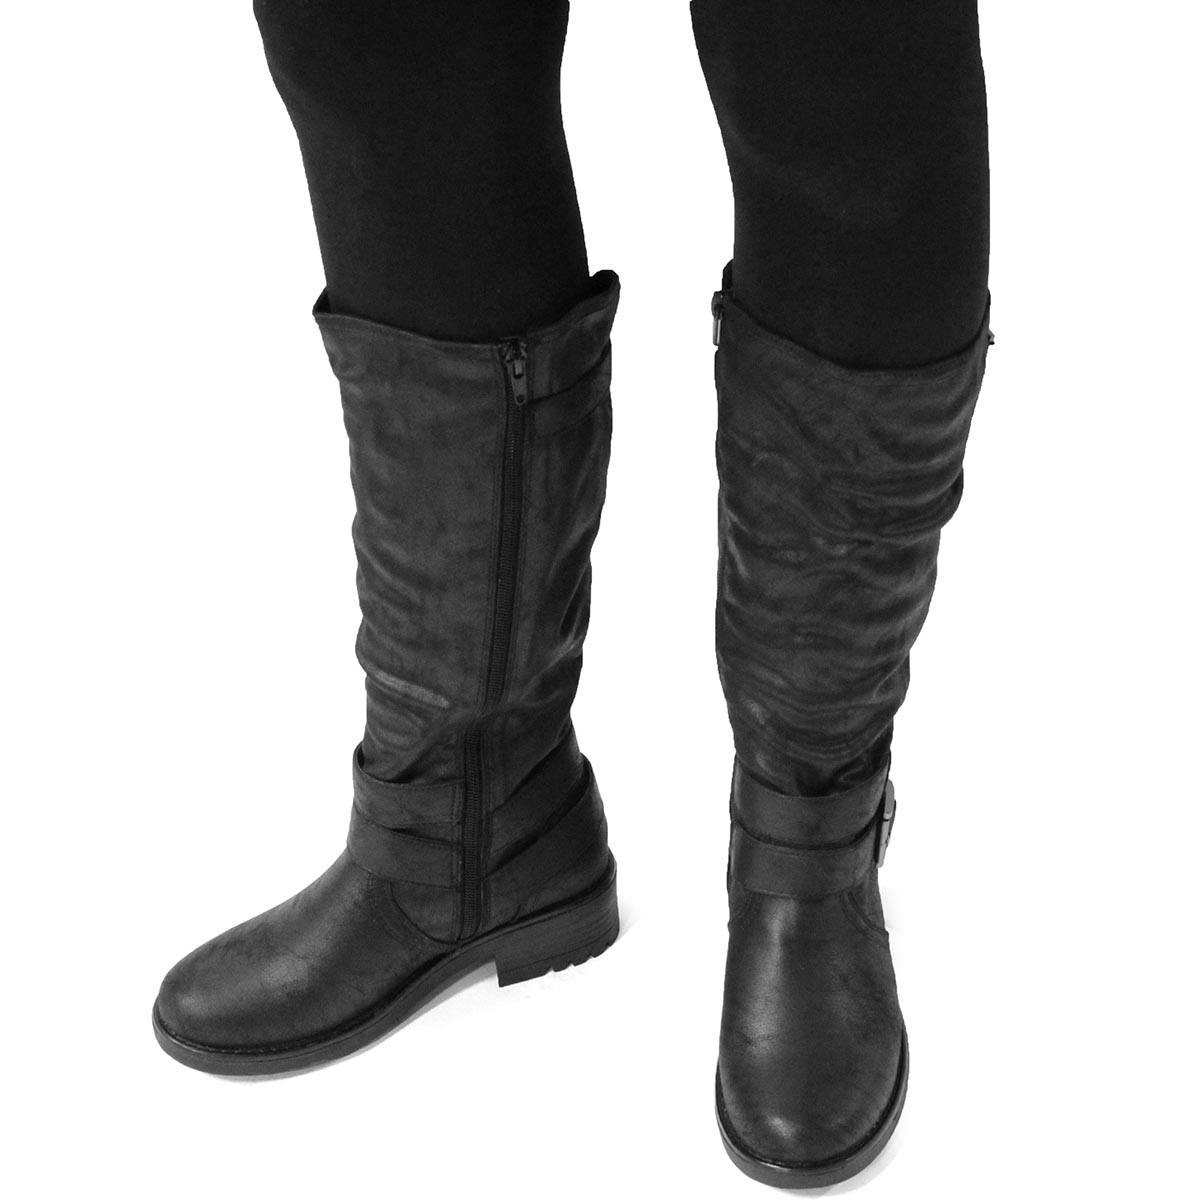 softmoc wide calf boots